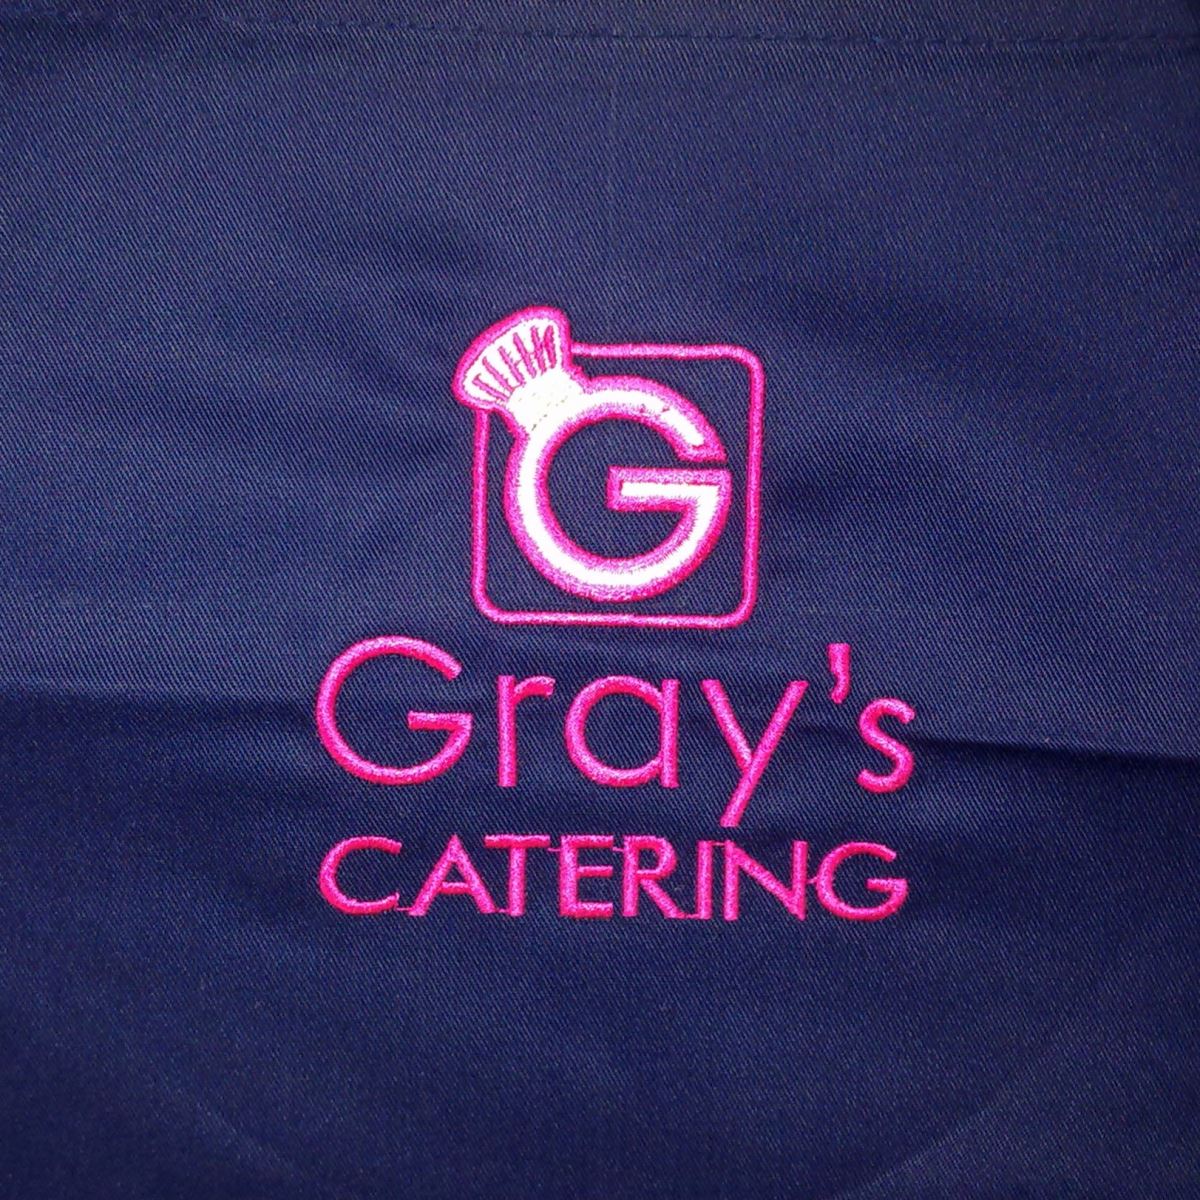 Gray's Catering logo embroidered onto workwear by KC Workwear of Southport, Merseyside.